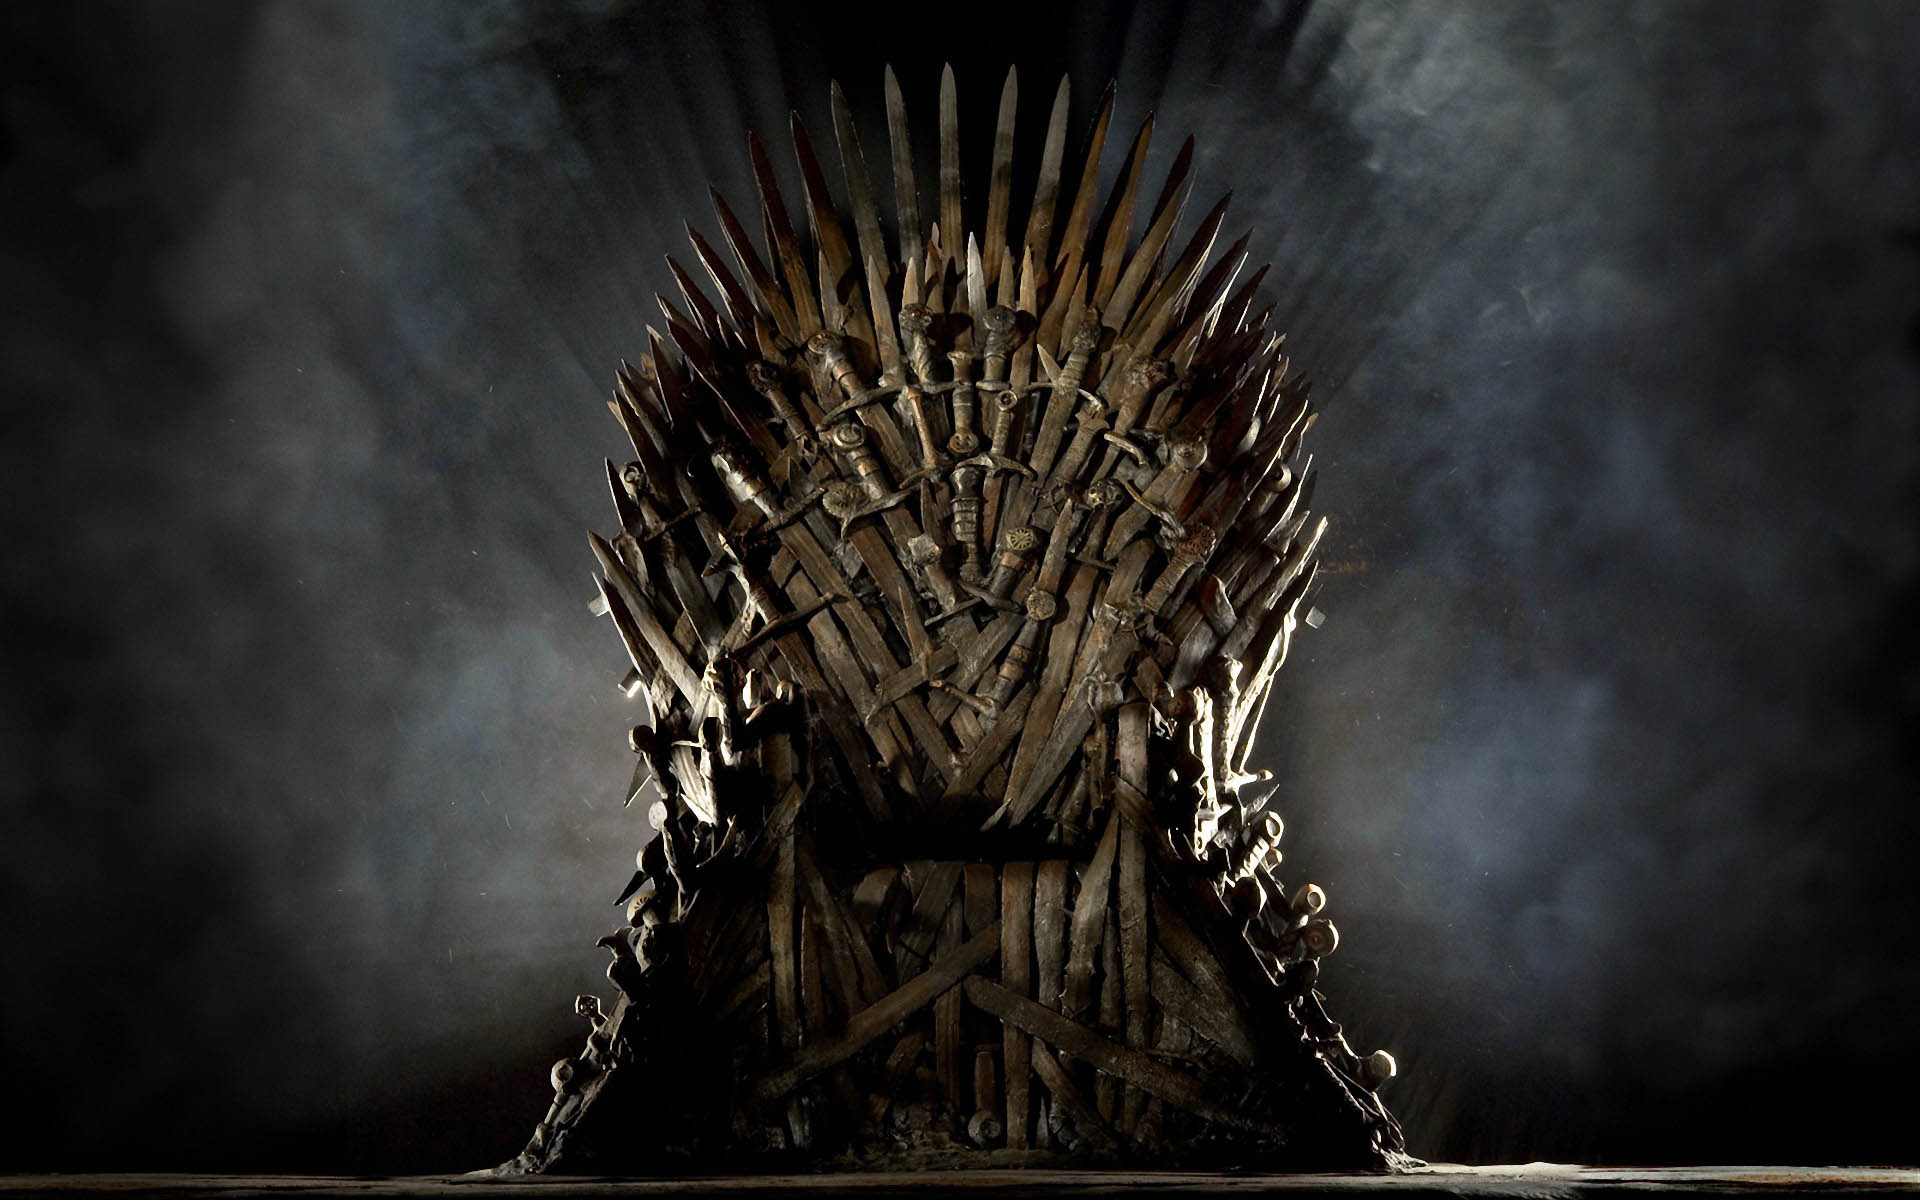 game-of-thrones-poster_85627-1920x1200.jpg